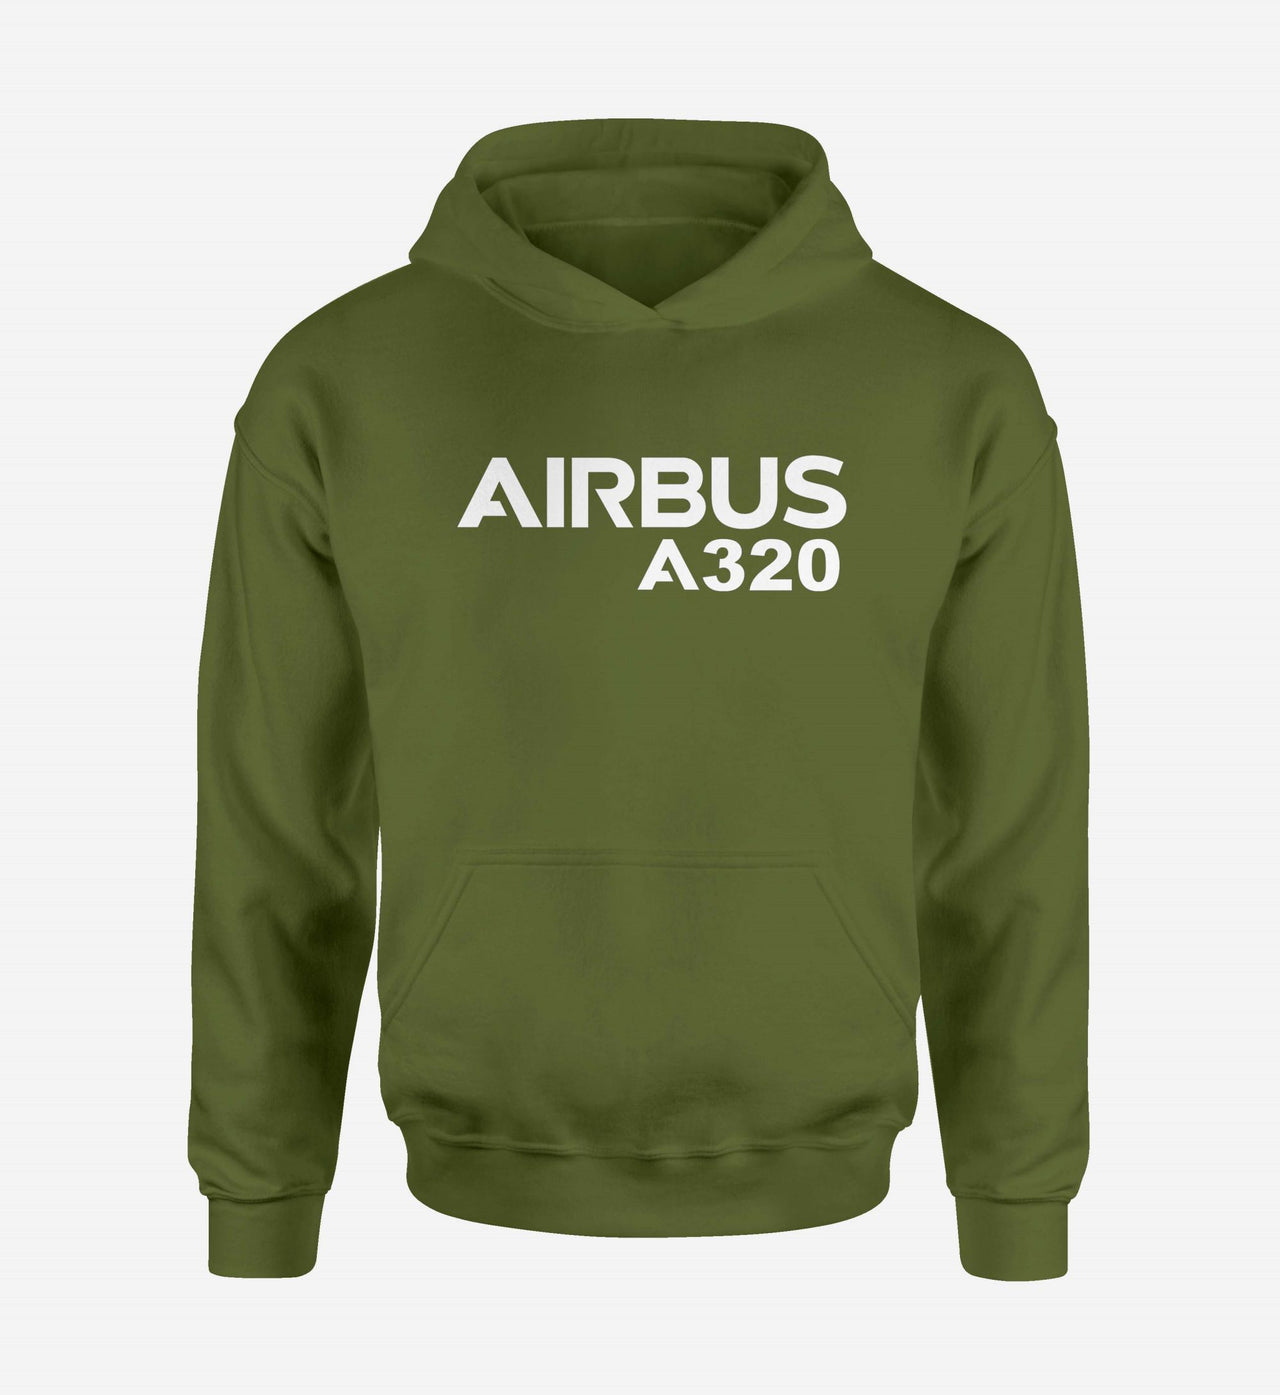 Airbus A320 & Text Designed Hoodies